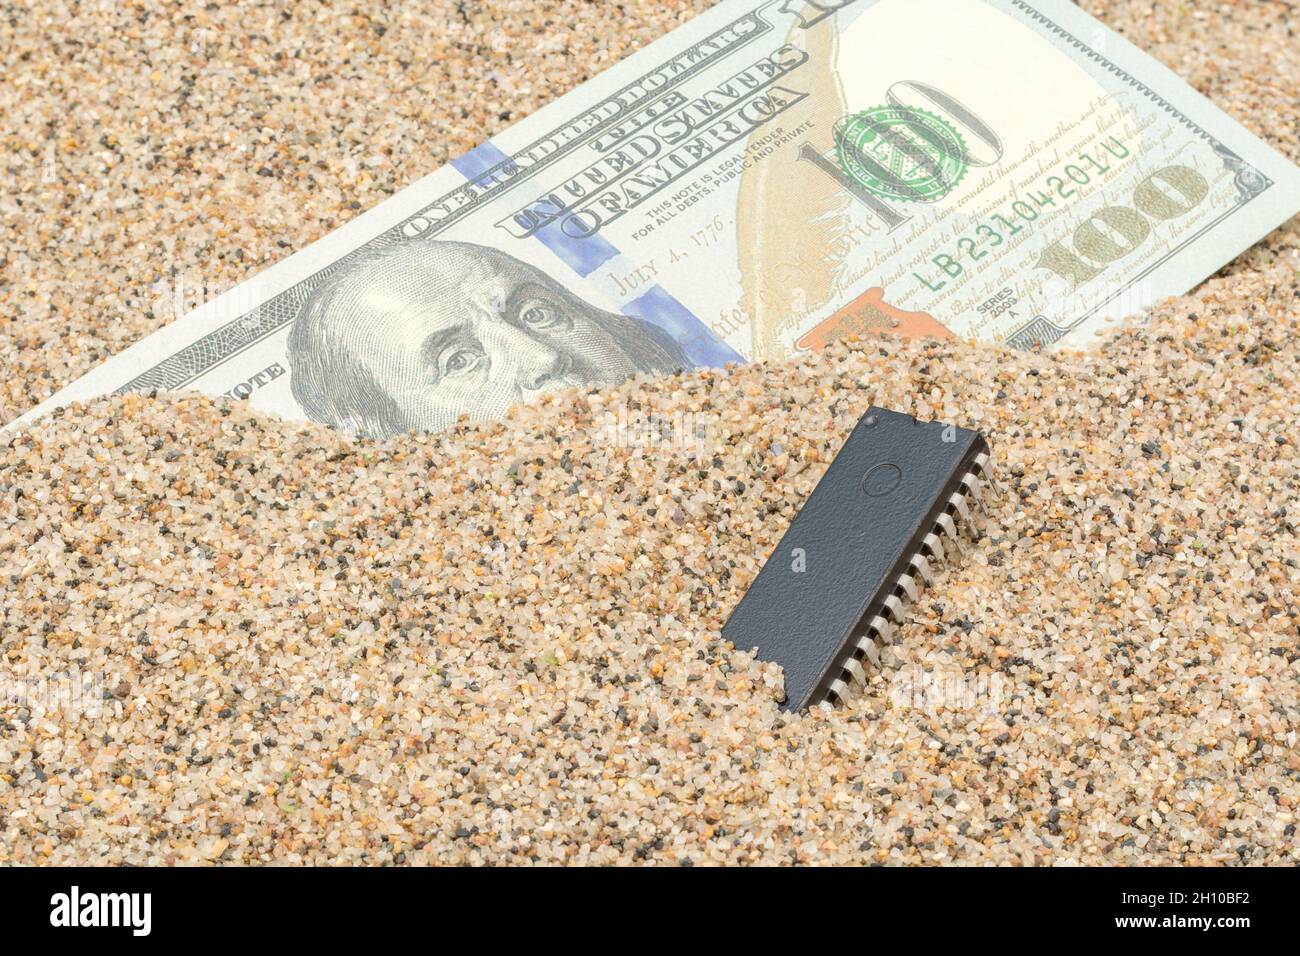 US $100 dollar bill / Benjamin Franklin banknote buried in sand with microchip. For US semiconductor chip shortages in the technology sector. Stock Photo